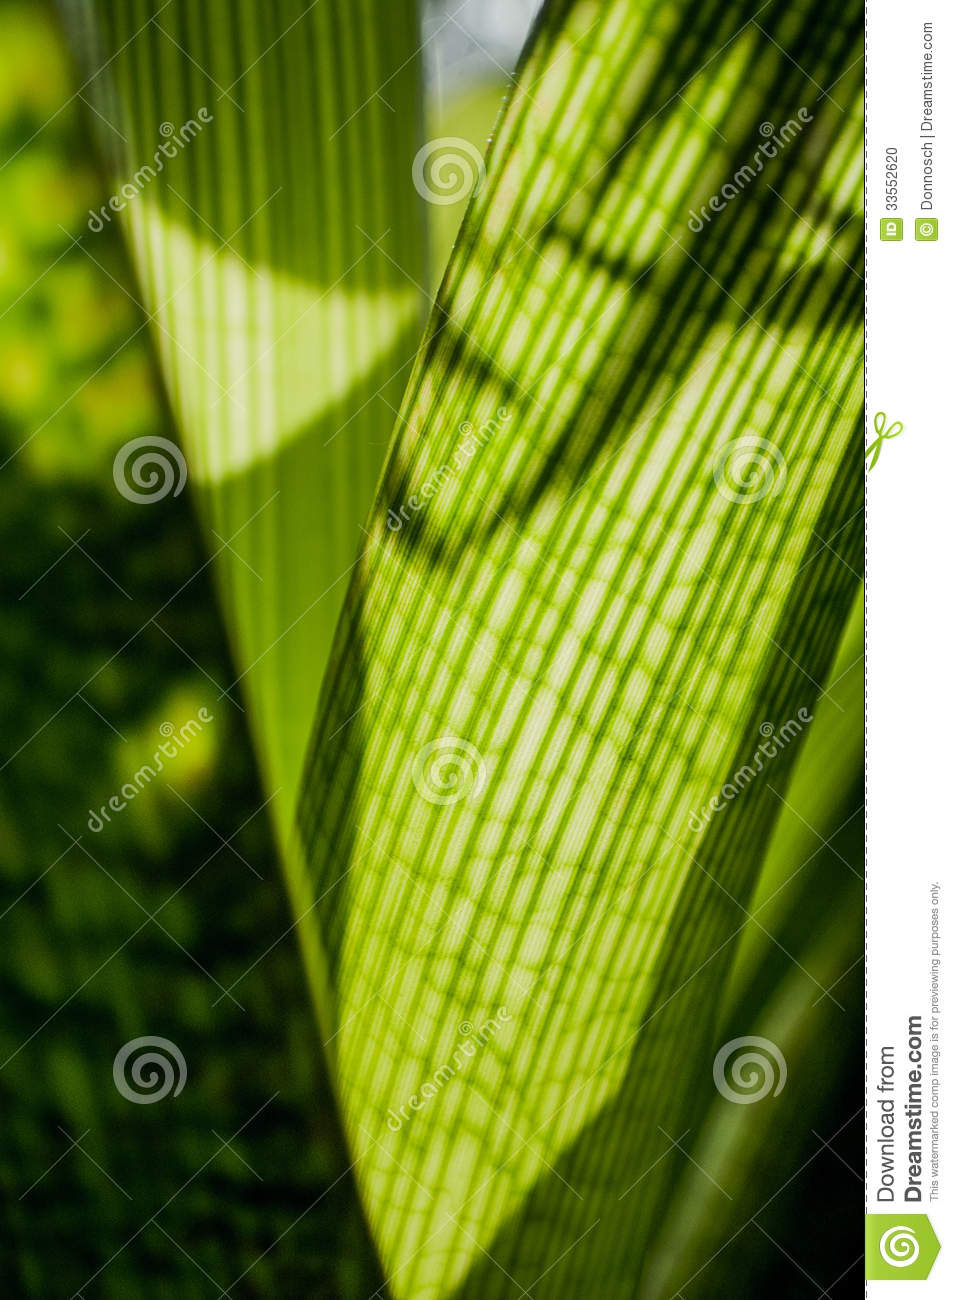 Part Of A Series Of Plant Photos Focused On The Color Green And Its